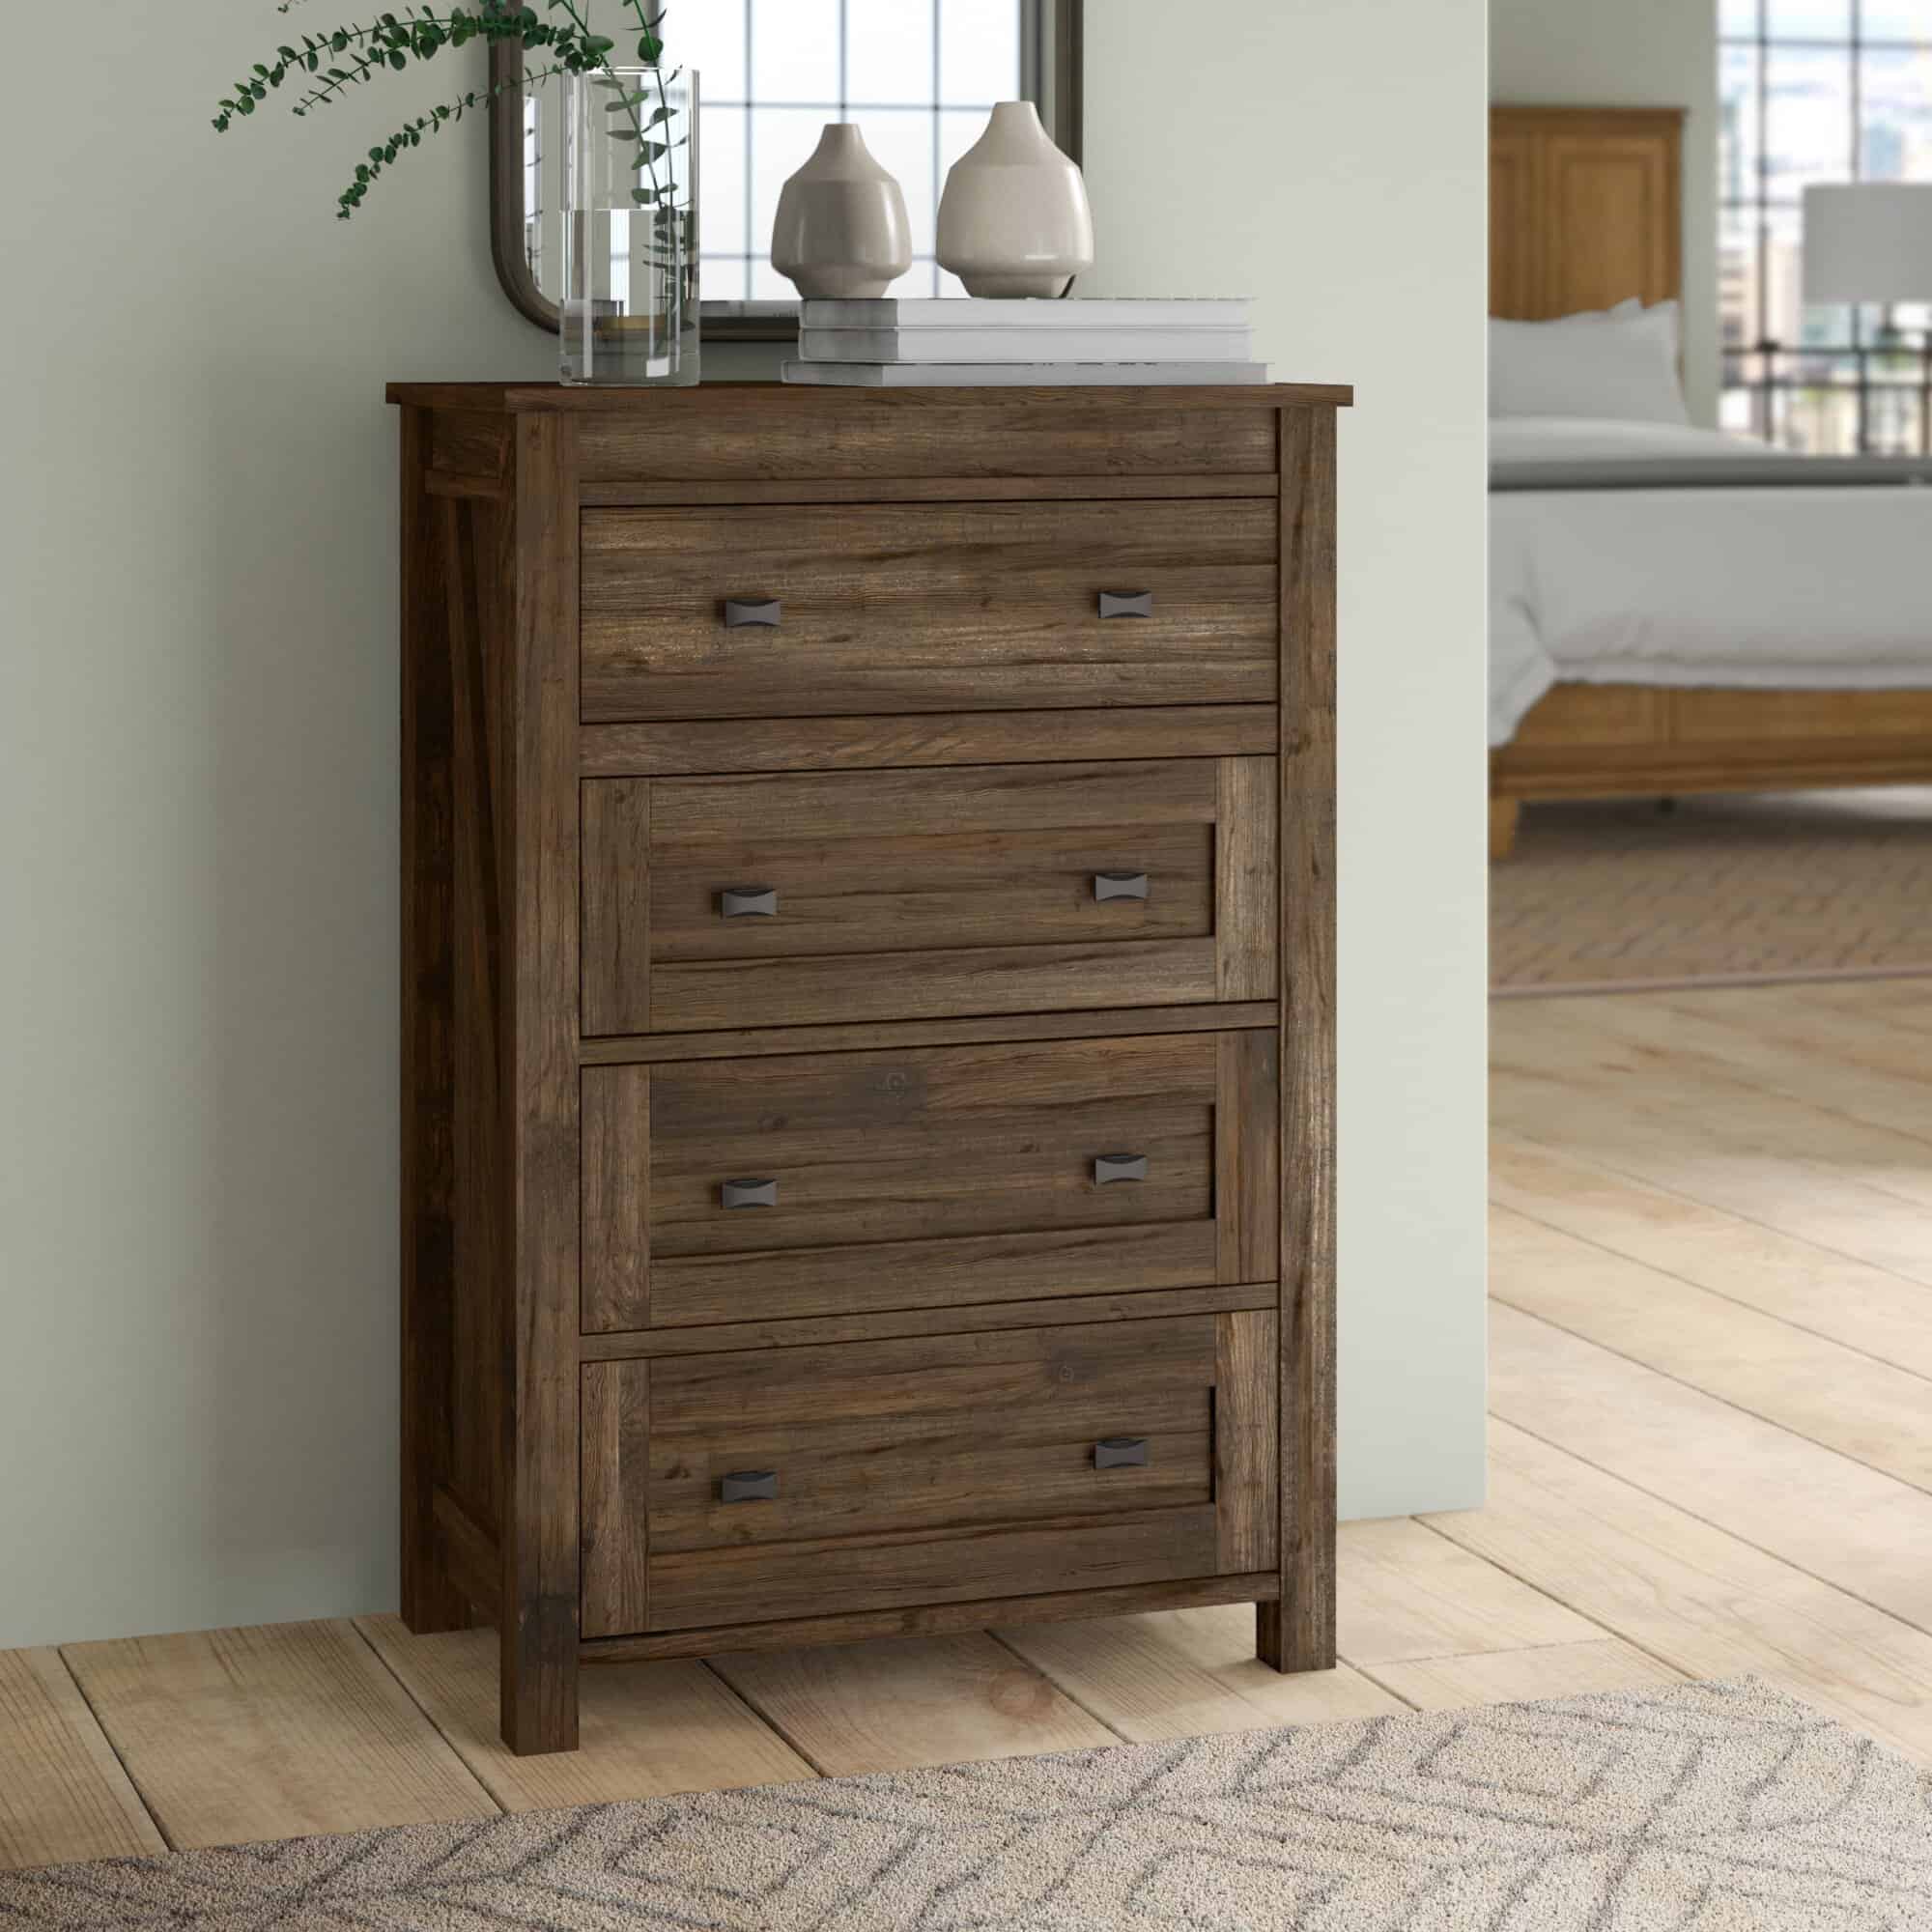 Combine Practicality With Aesthetic With A Chest Drawer